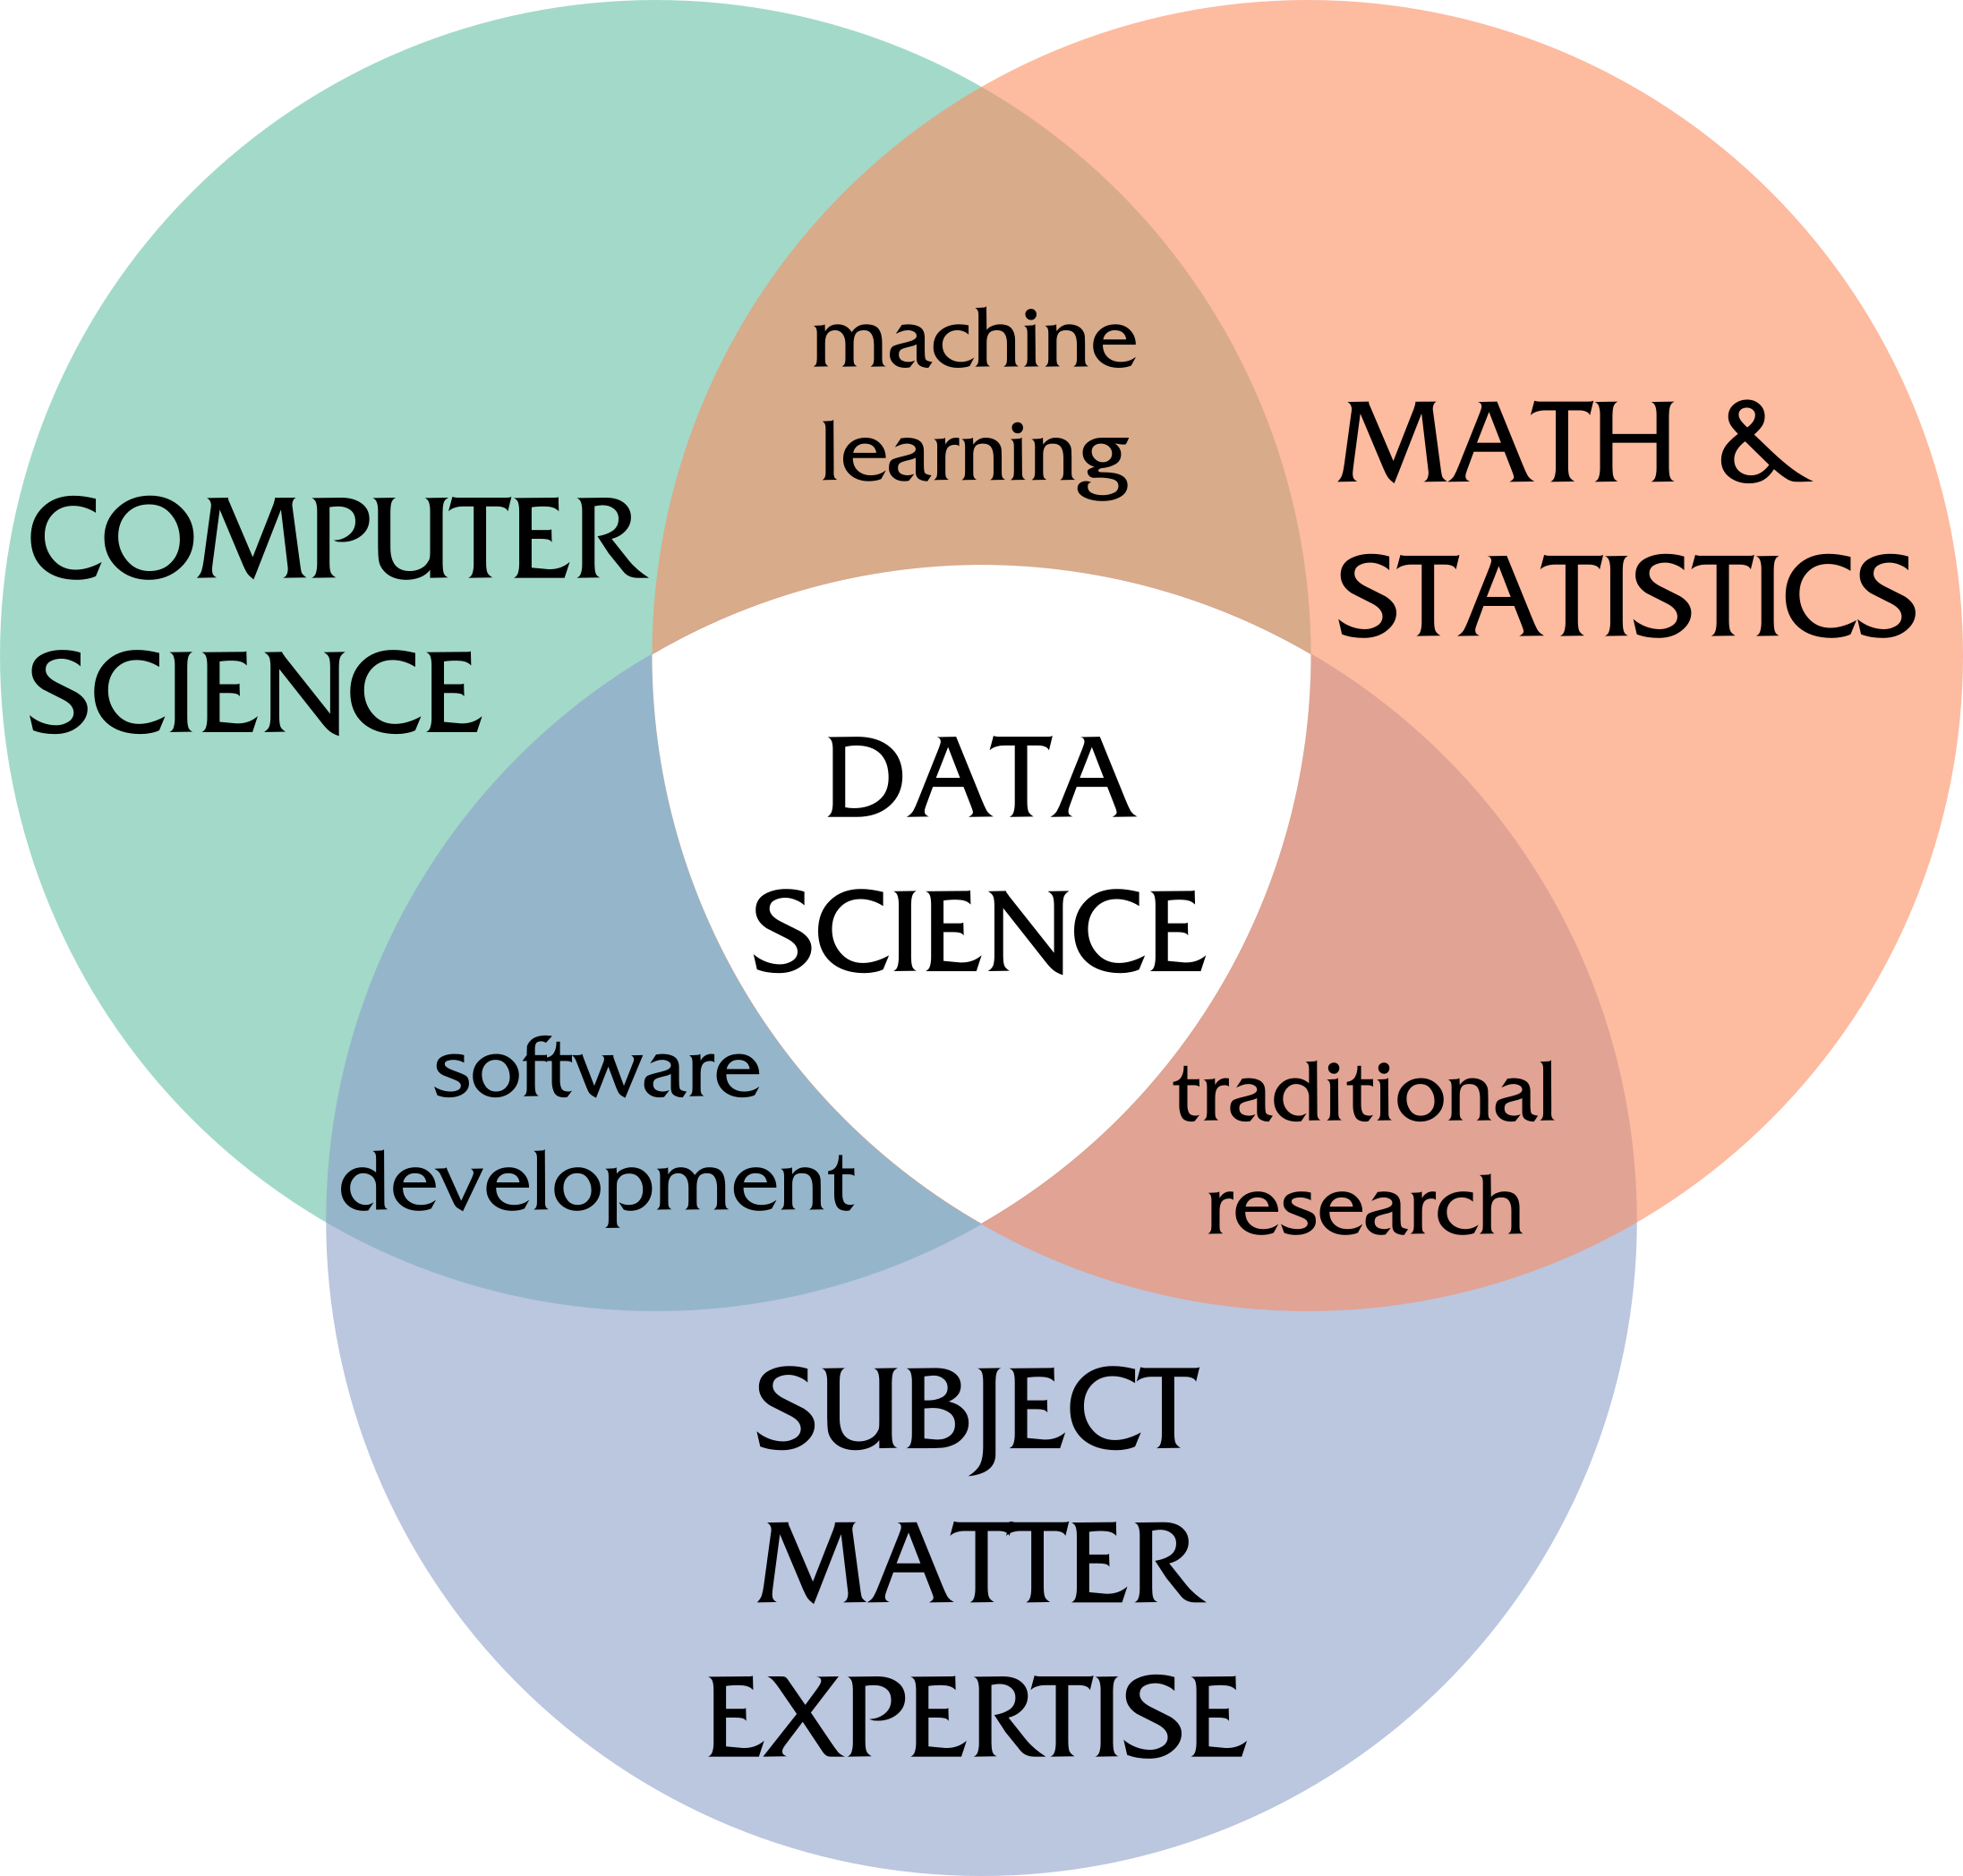 Data science lies at the intersection of statistics, computer science, and domain-specific questions